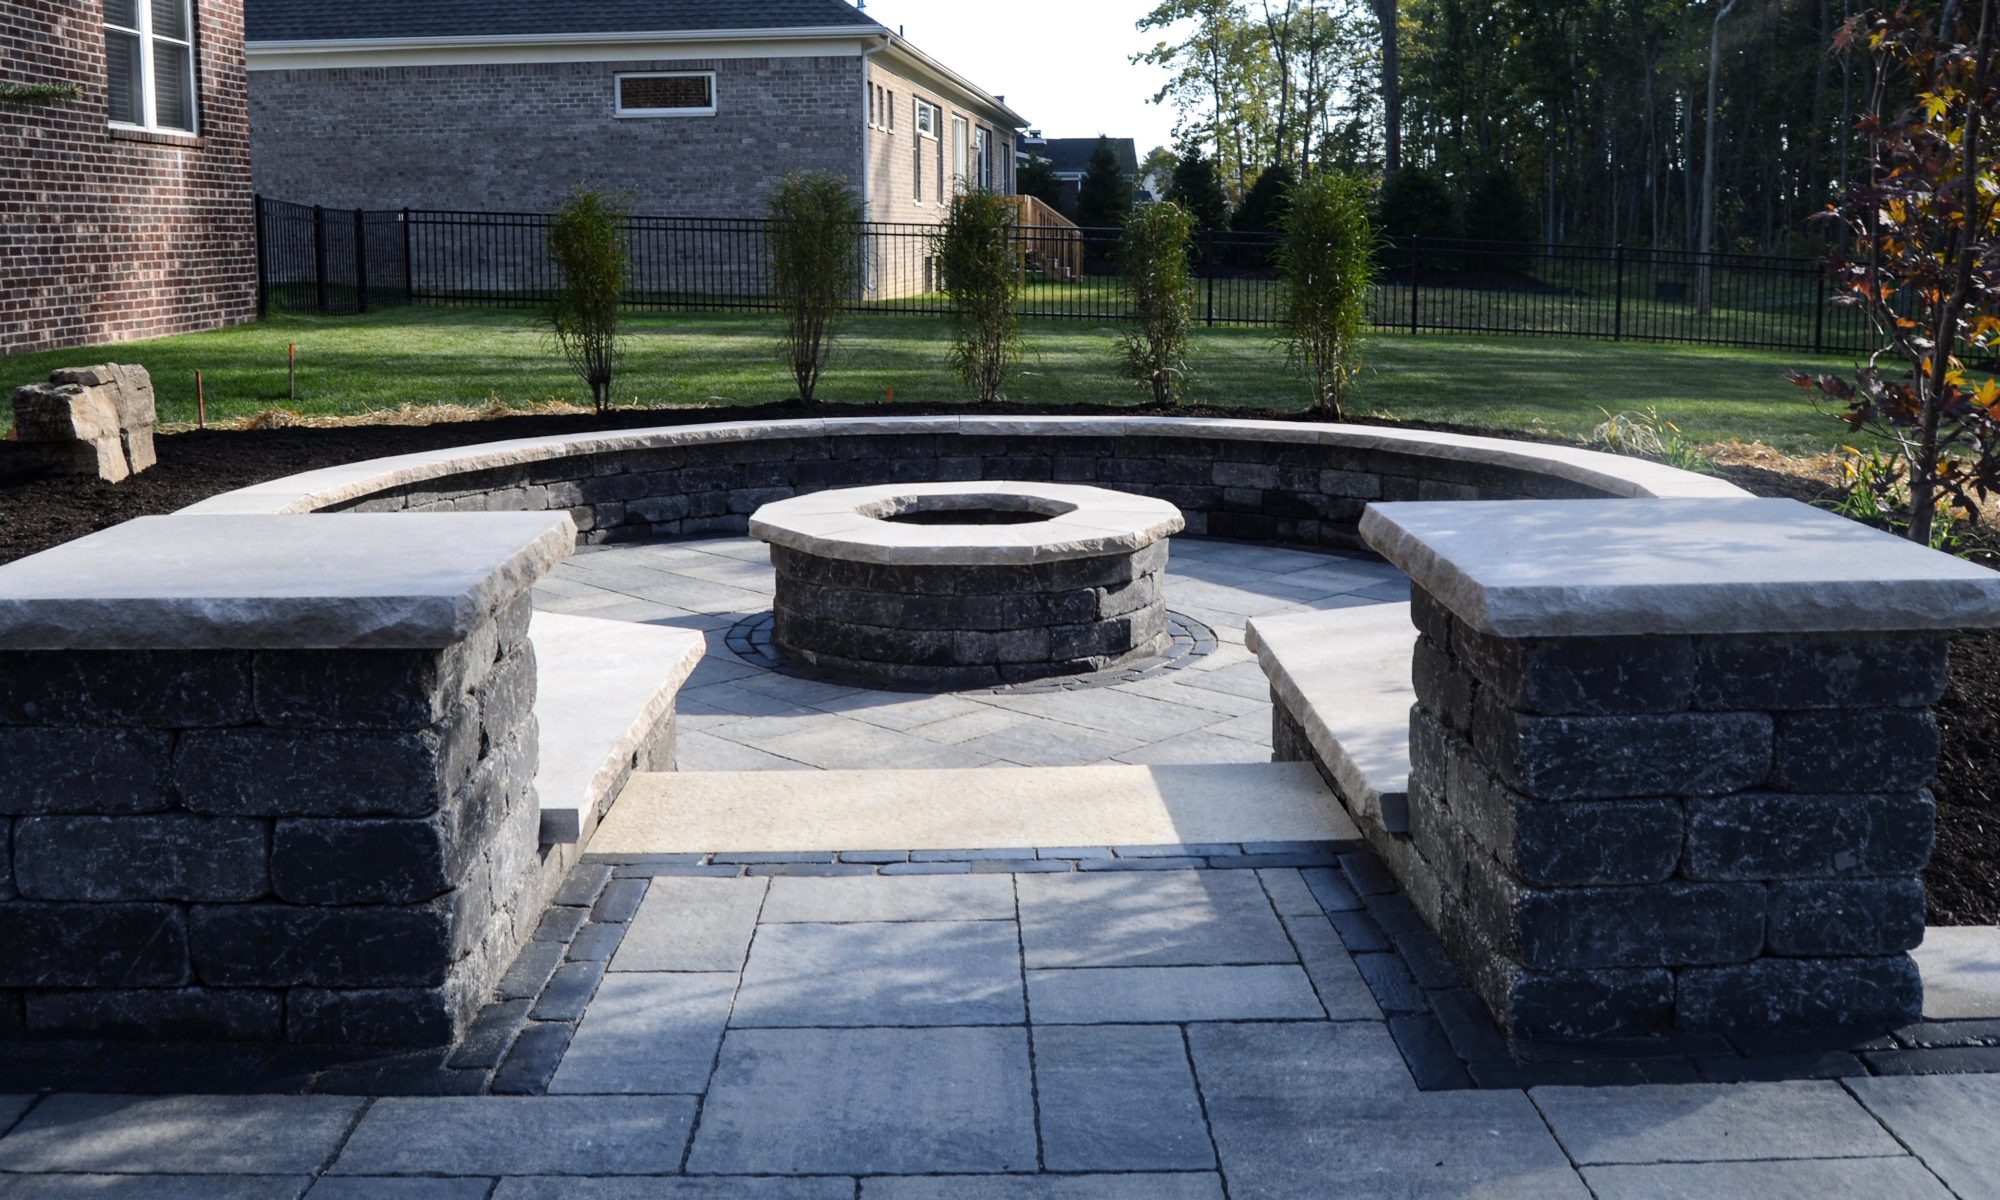 Precision Outdoors Zionsville Fire Pit & Patio custom paver patio gathering space backyard sunken fire pit landscaping mulching straw and seed placement unblock Bristol valley steel mountain Copthorne accents seating wall belgard round fire pit Firepit Weston wall rock face limestone caps zionsville indiana privacy